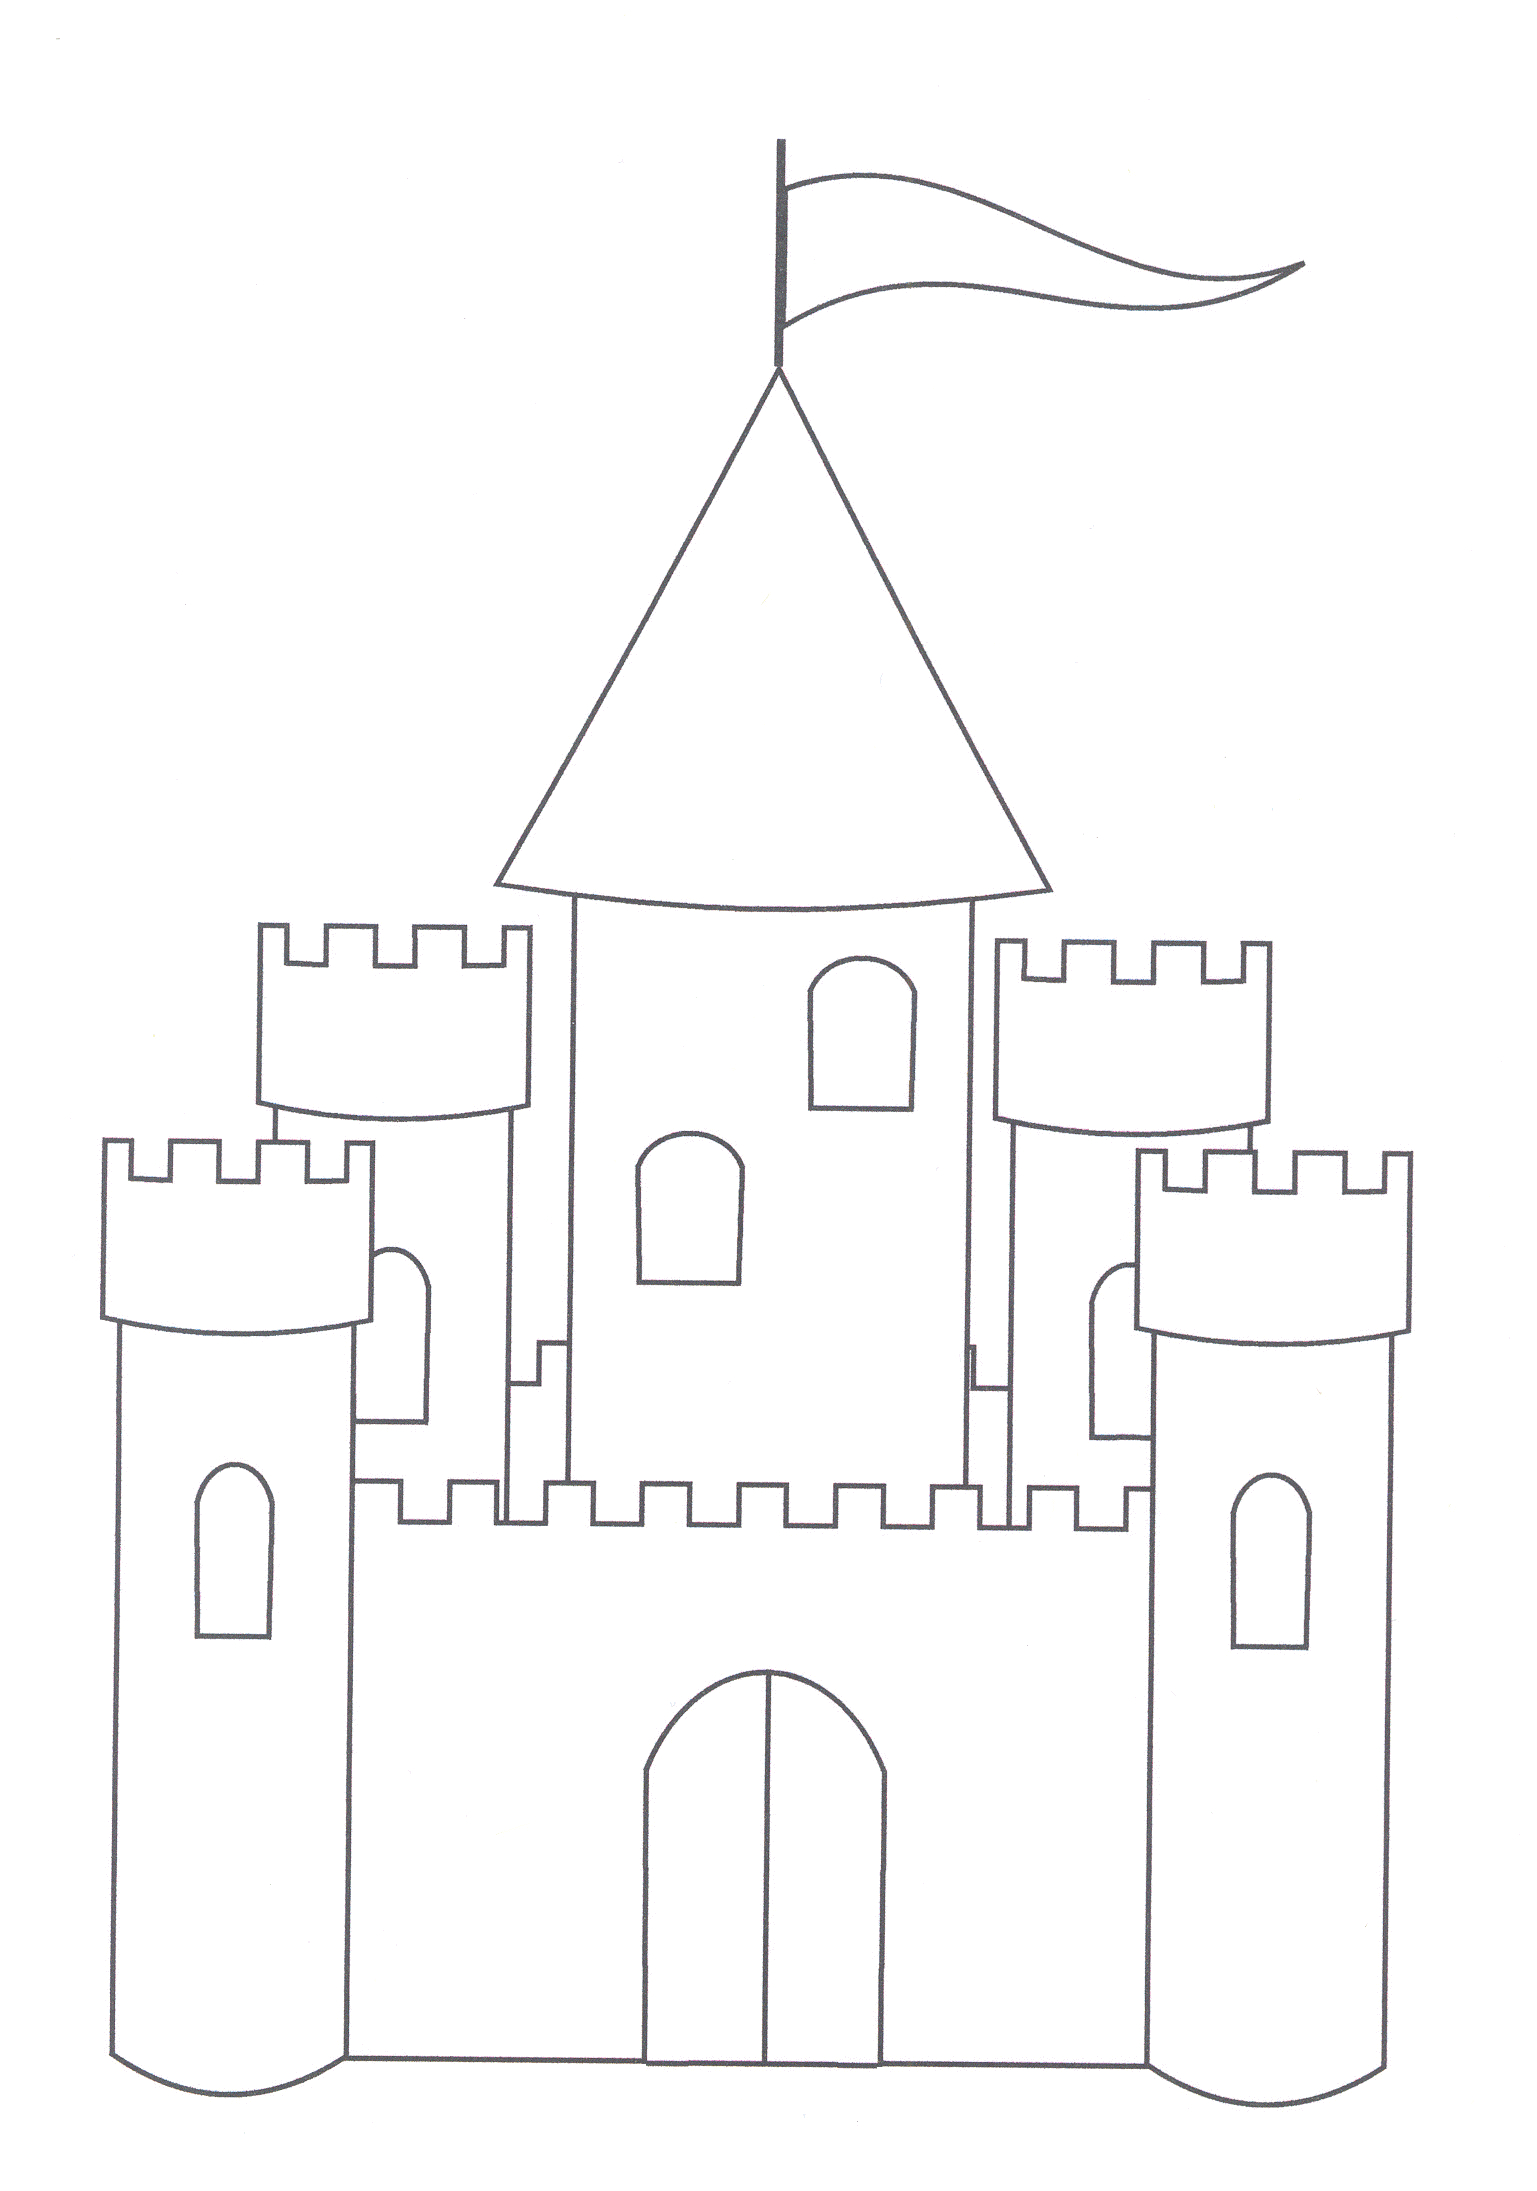 Princess Castle Coloring Page Free Printable Castle Coloring Pages For Kids